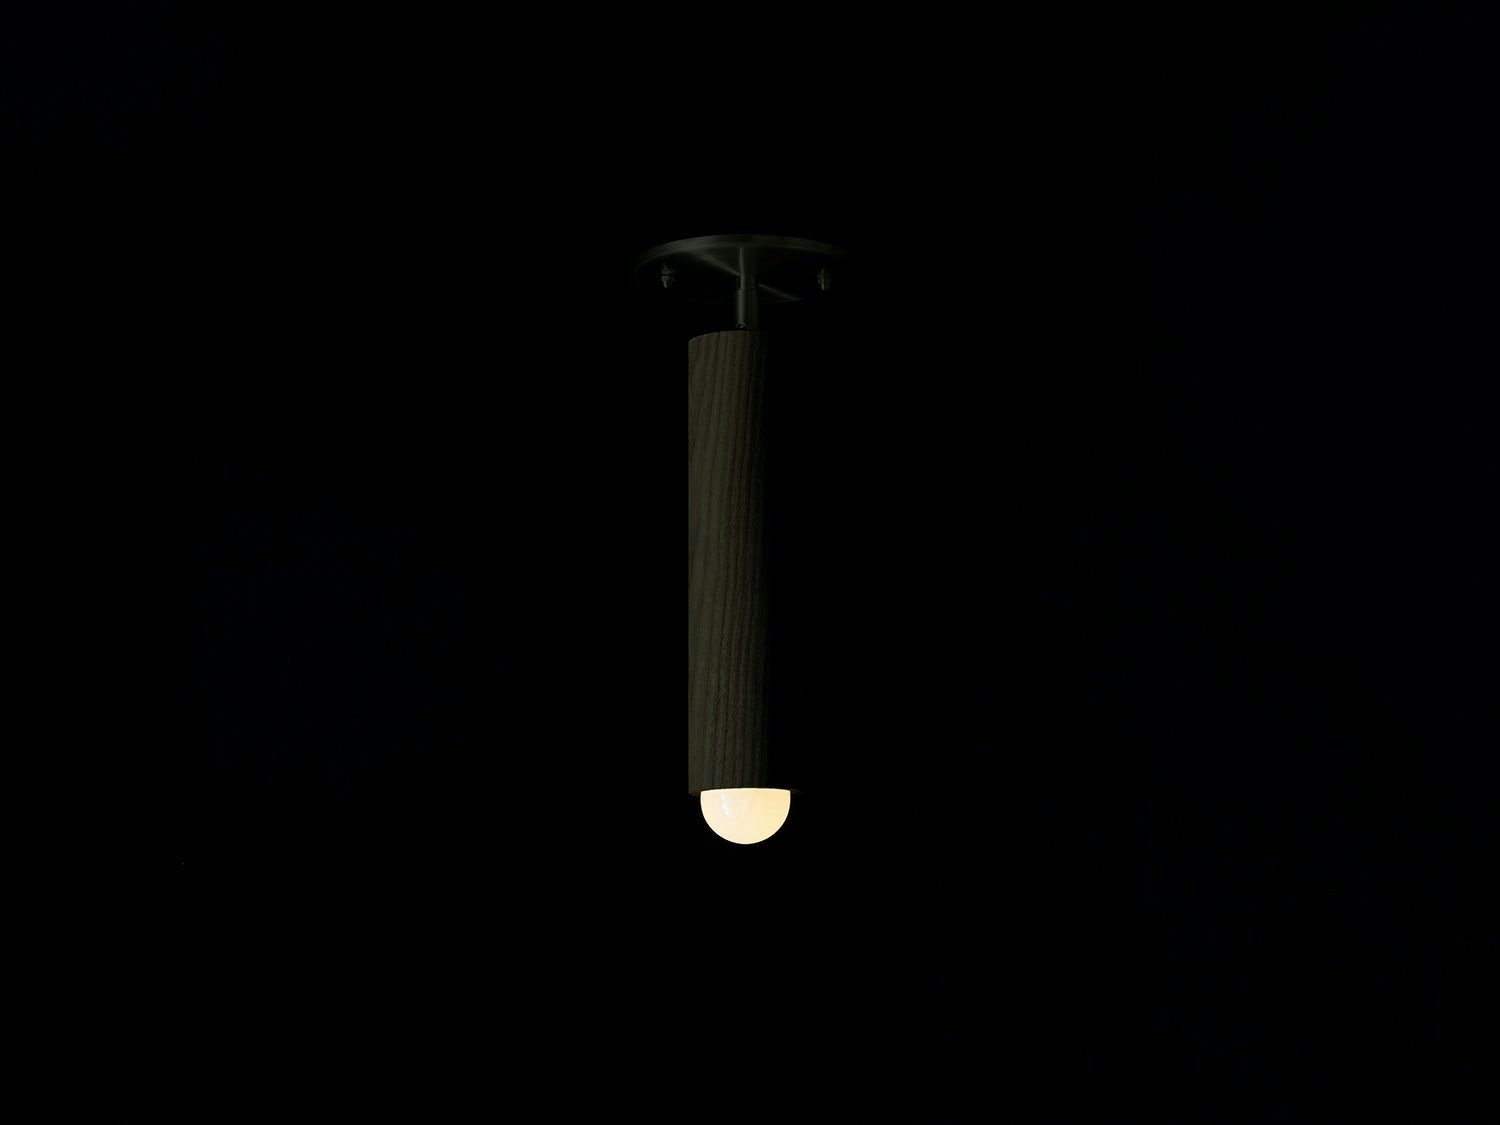 gallery image for Lodge-Sconce_Oxidized_Black